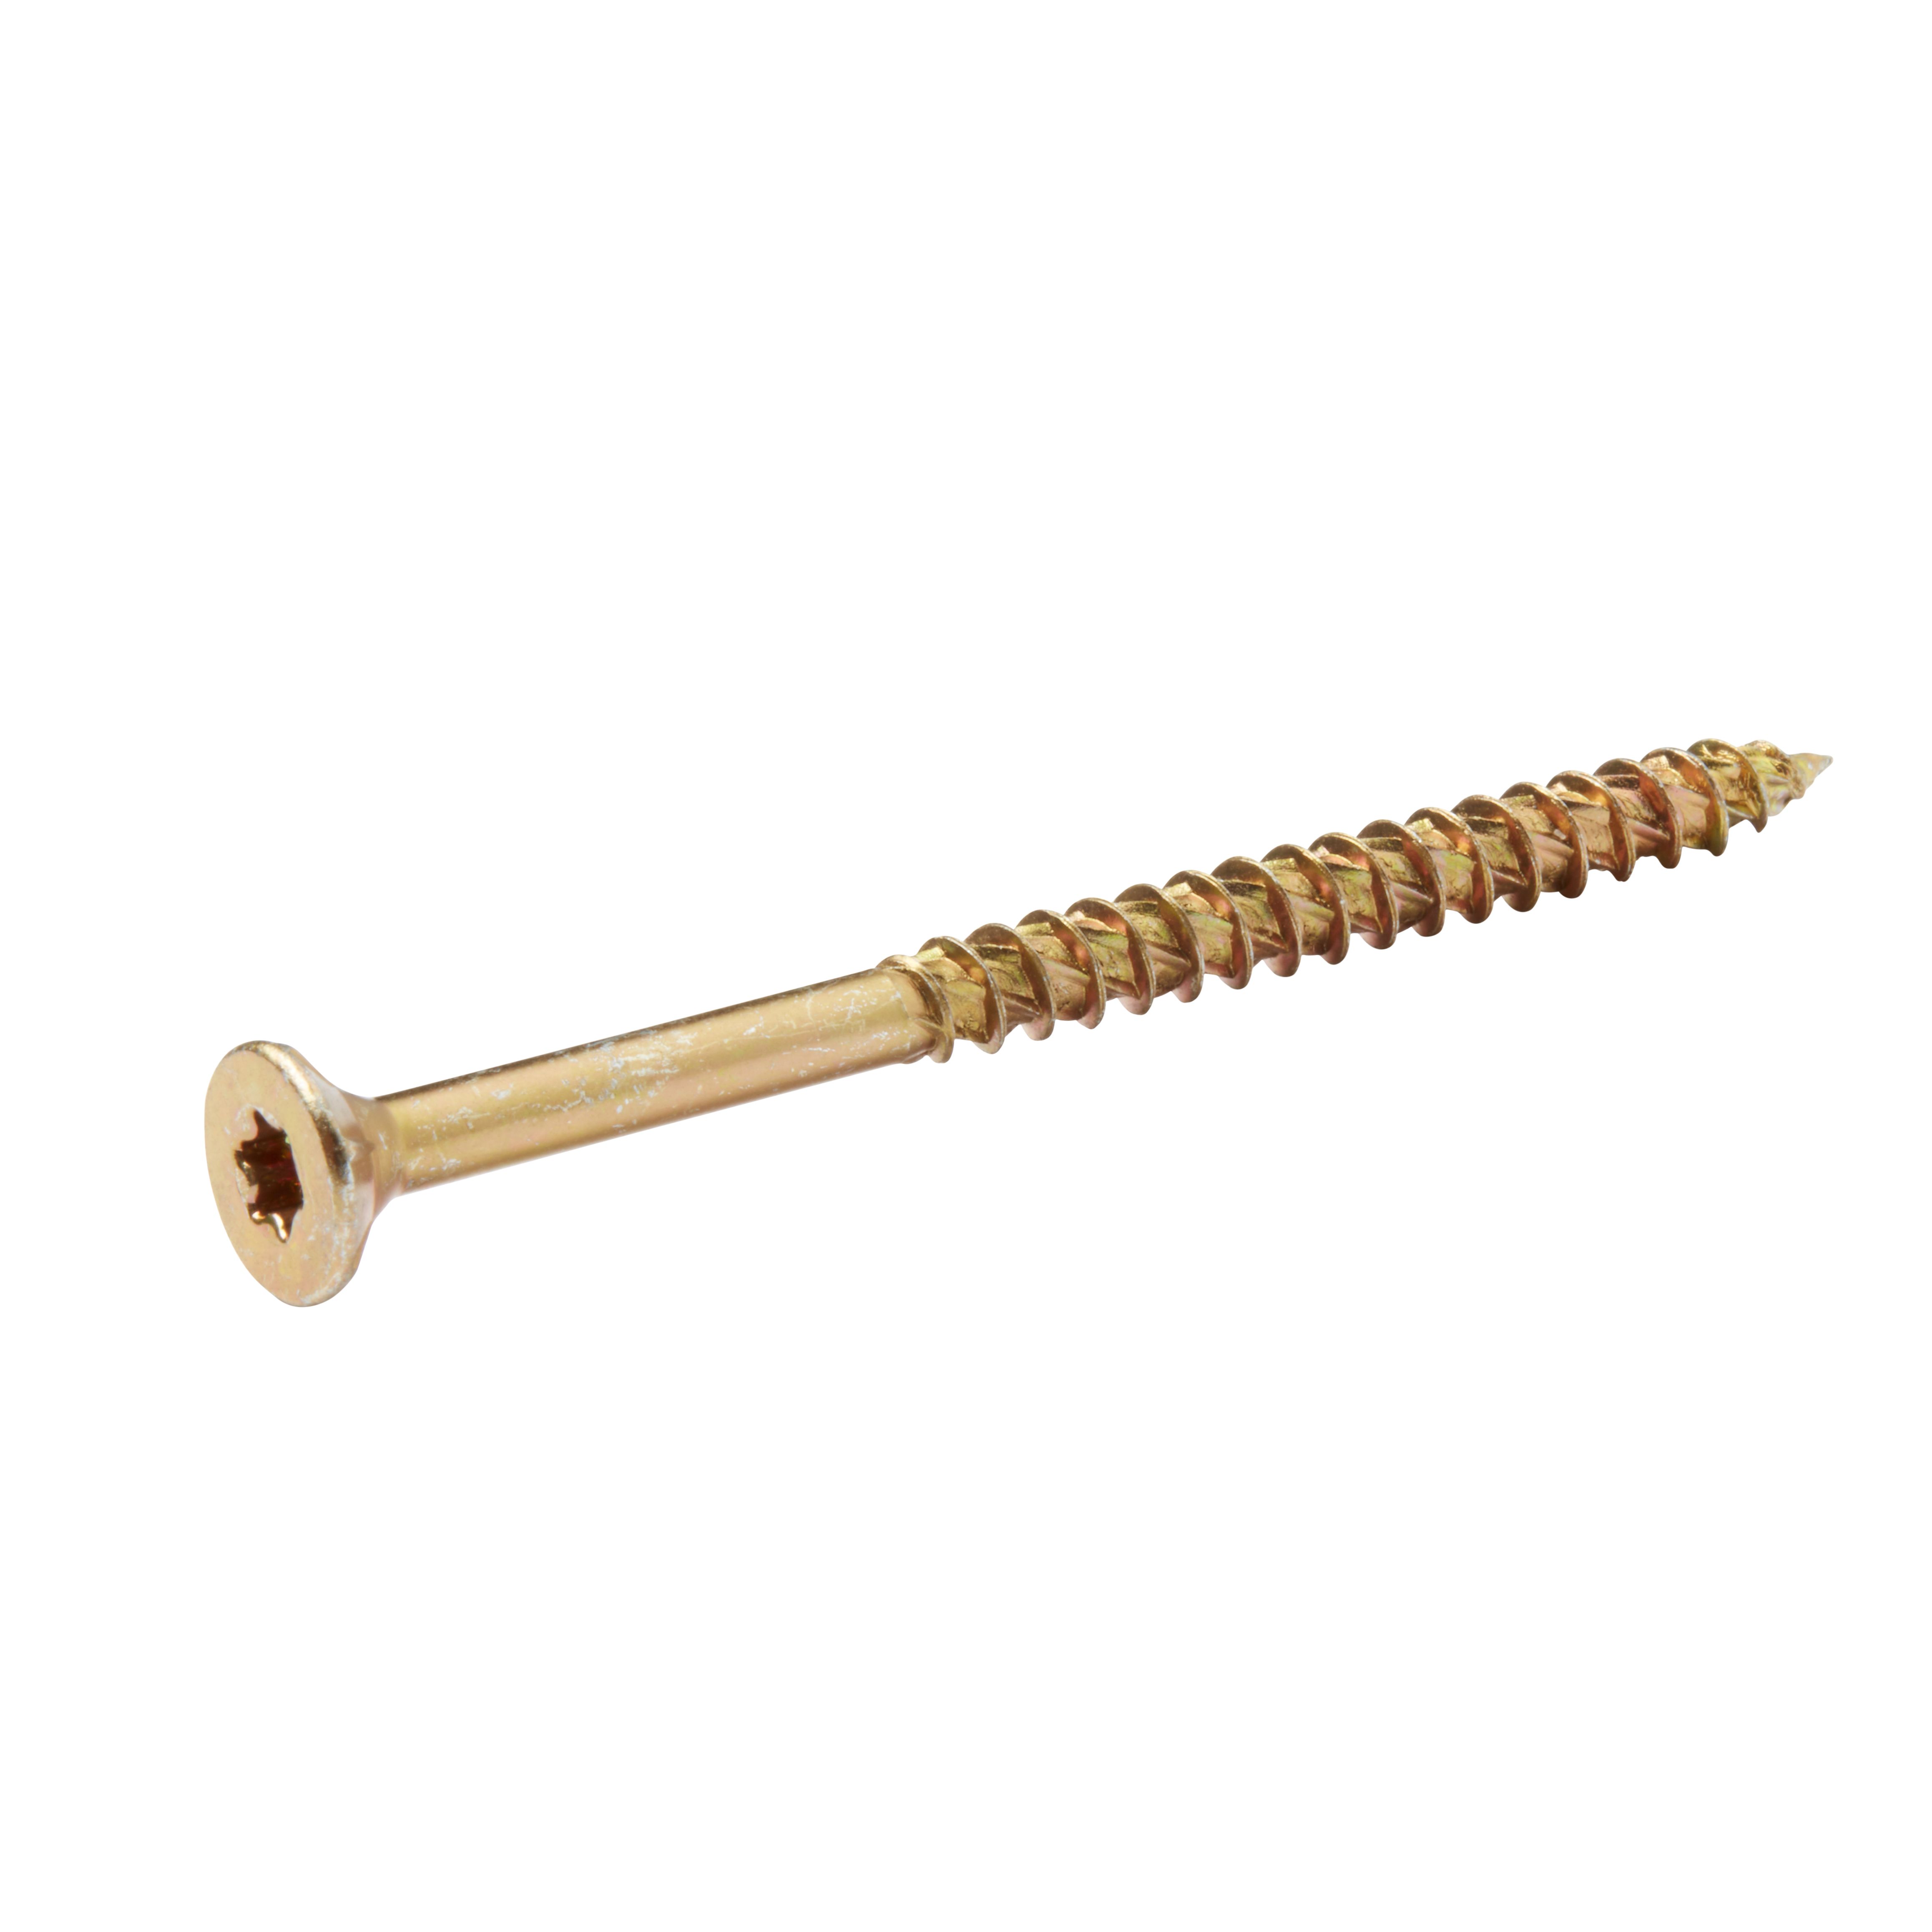 TurboDrive Assorted wood screw TX Double-countersunk Yellow-passivated Carbon steel Screw, Pack of 600